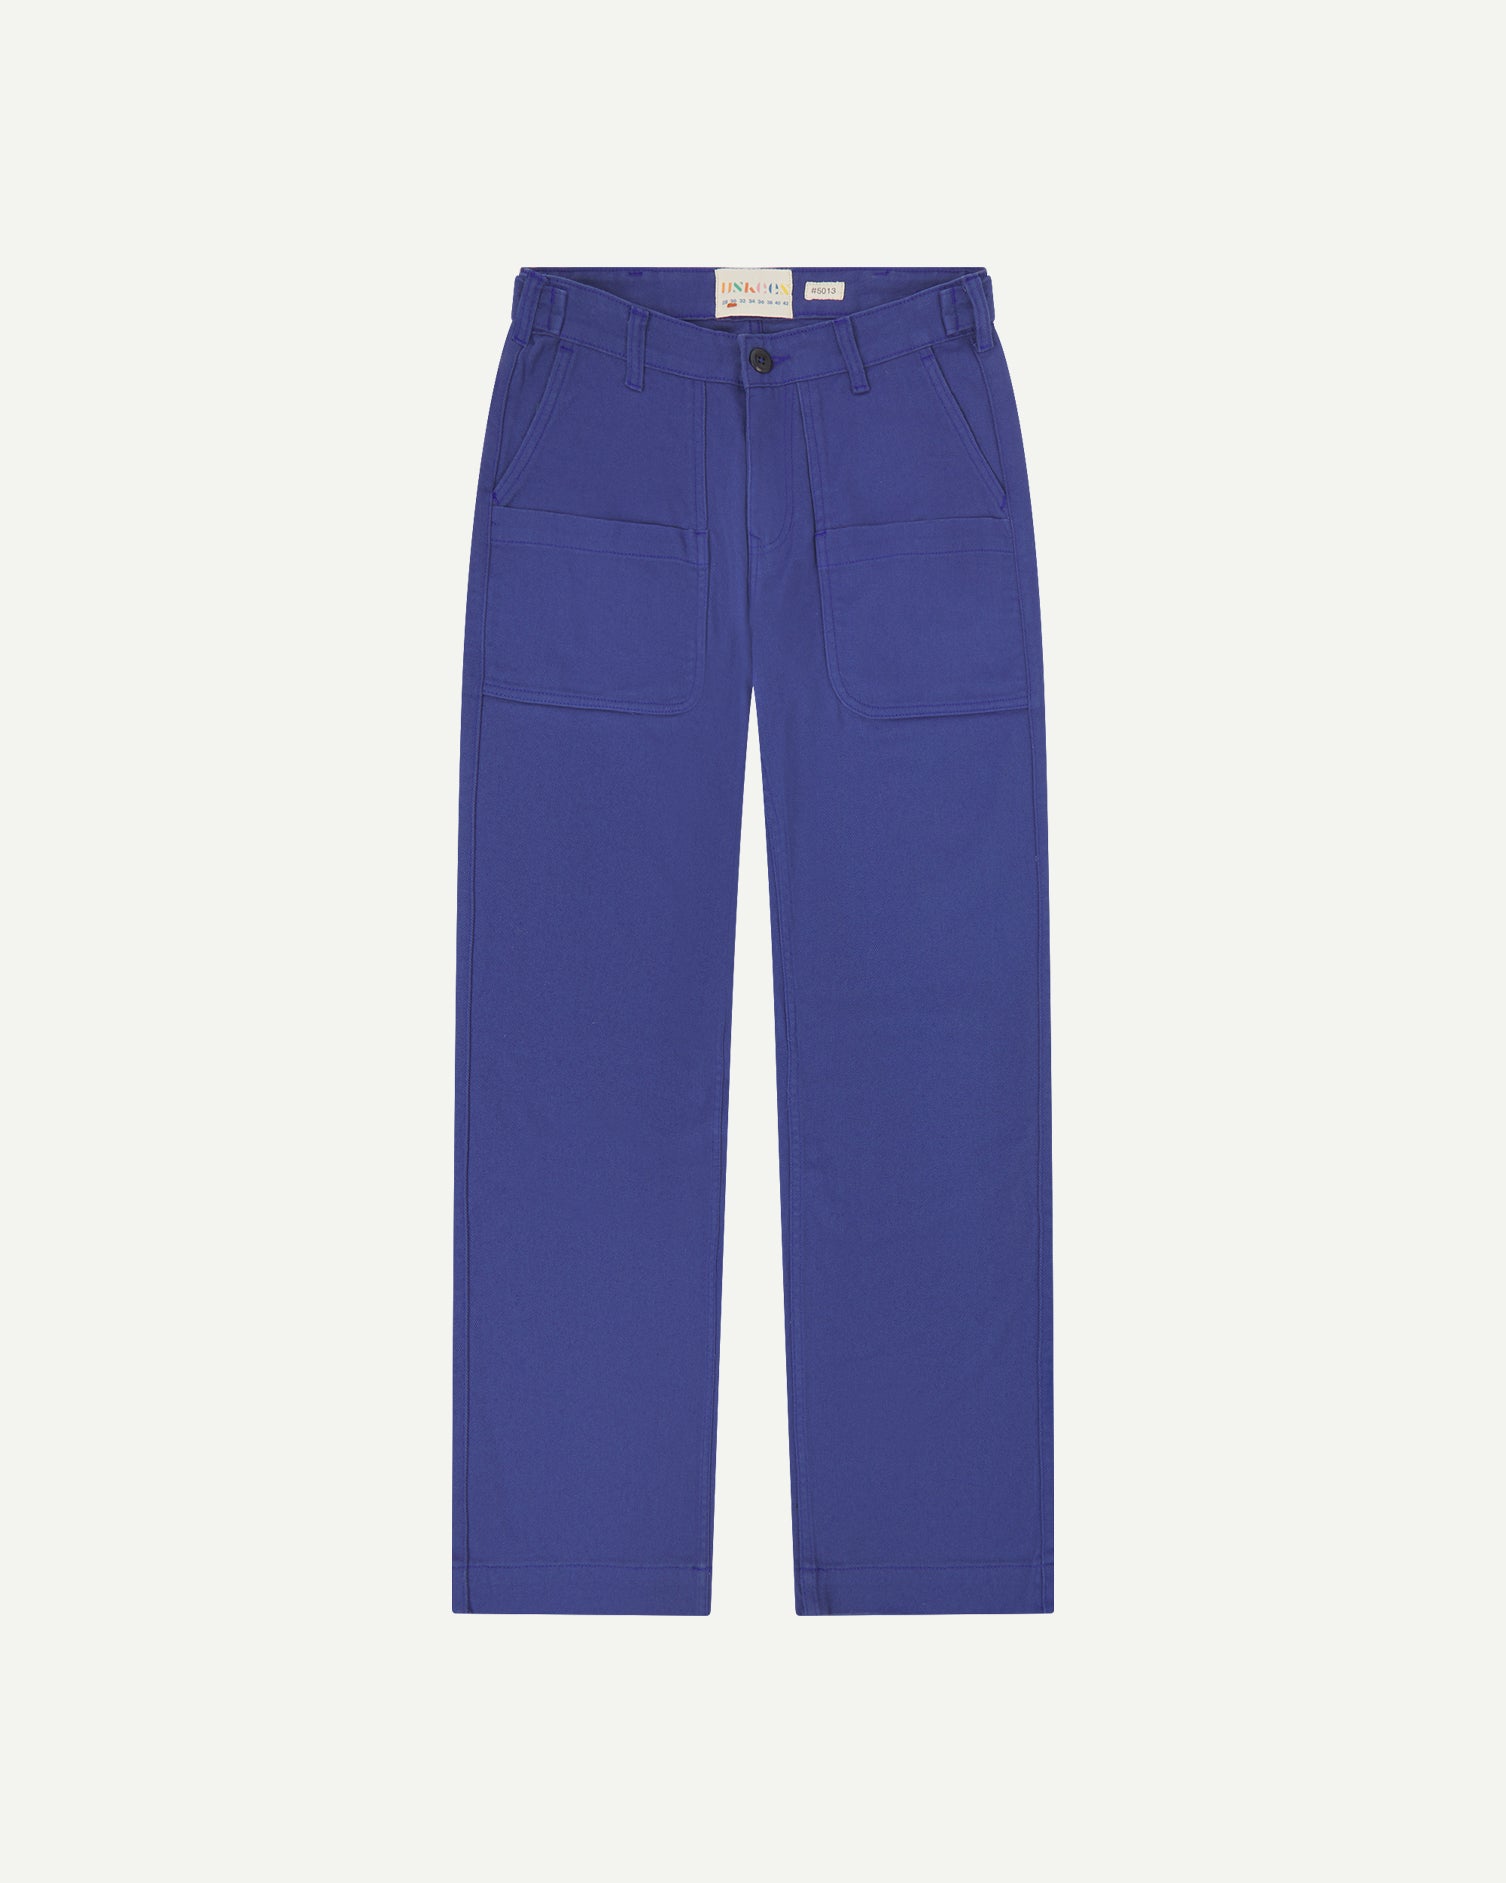 #5013 drill straight leg pants with layered pockets - ultra blue